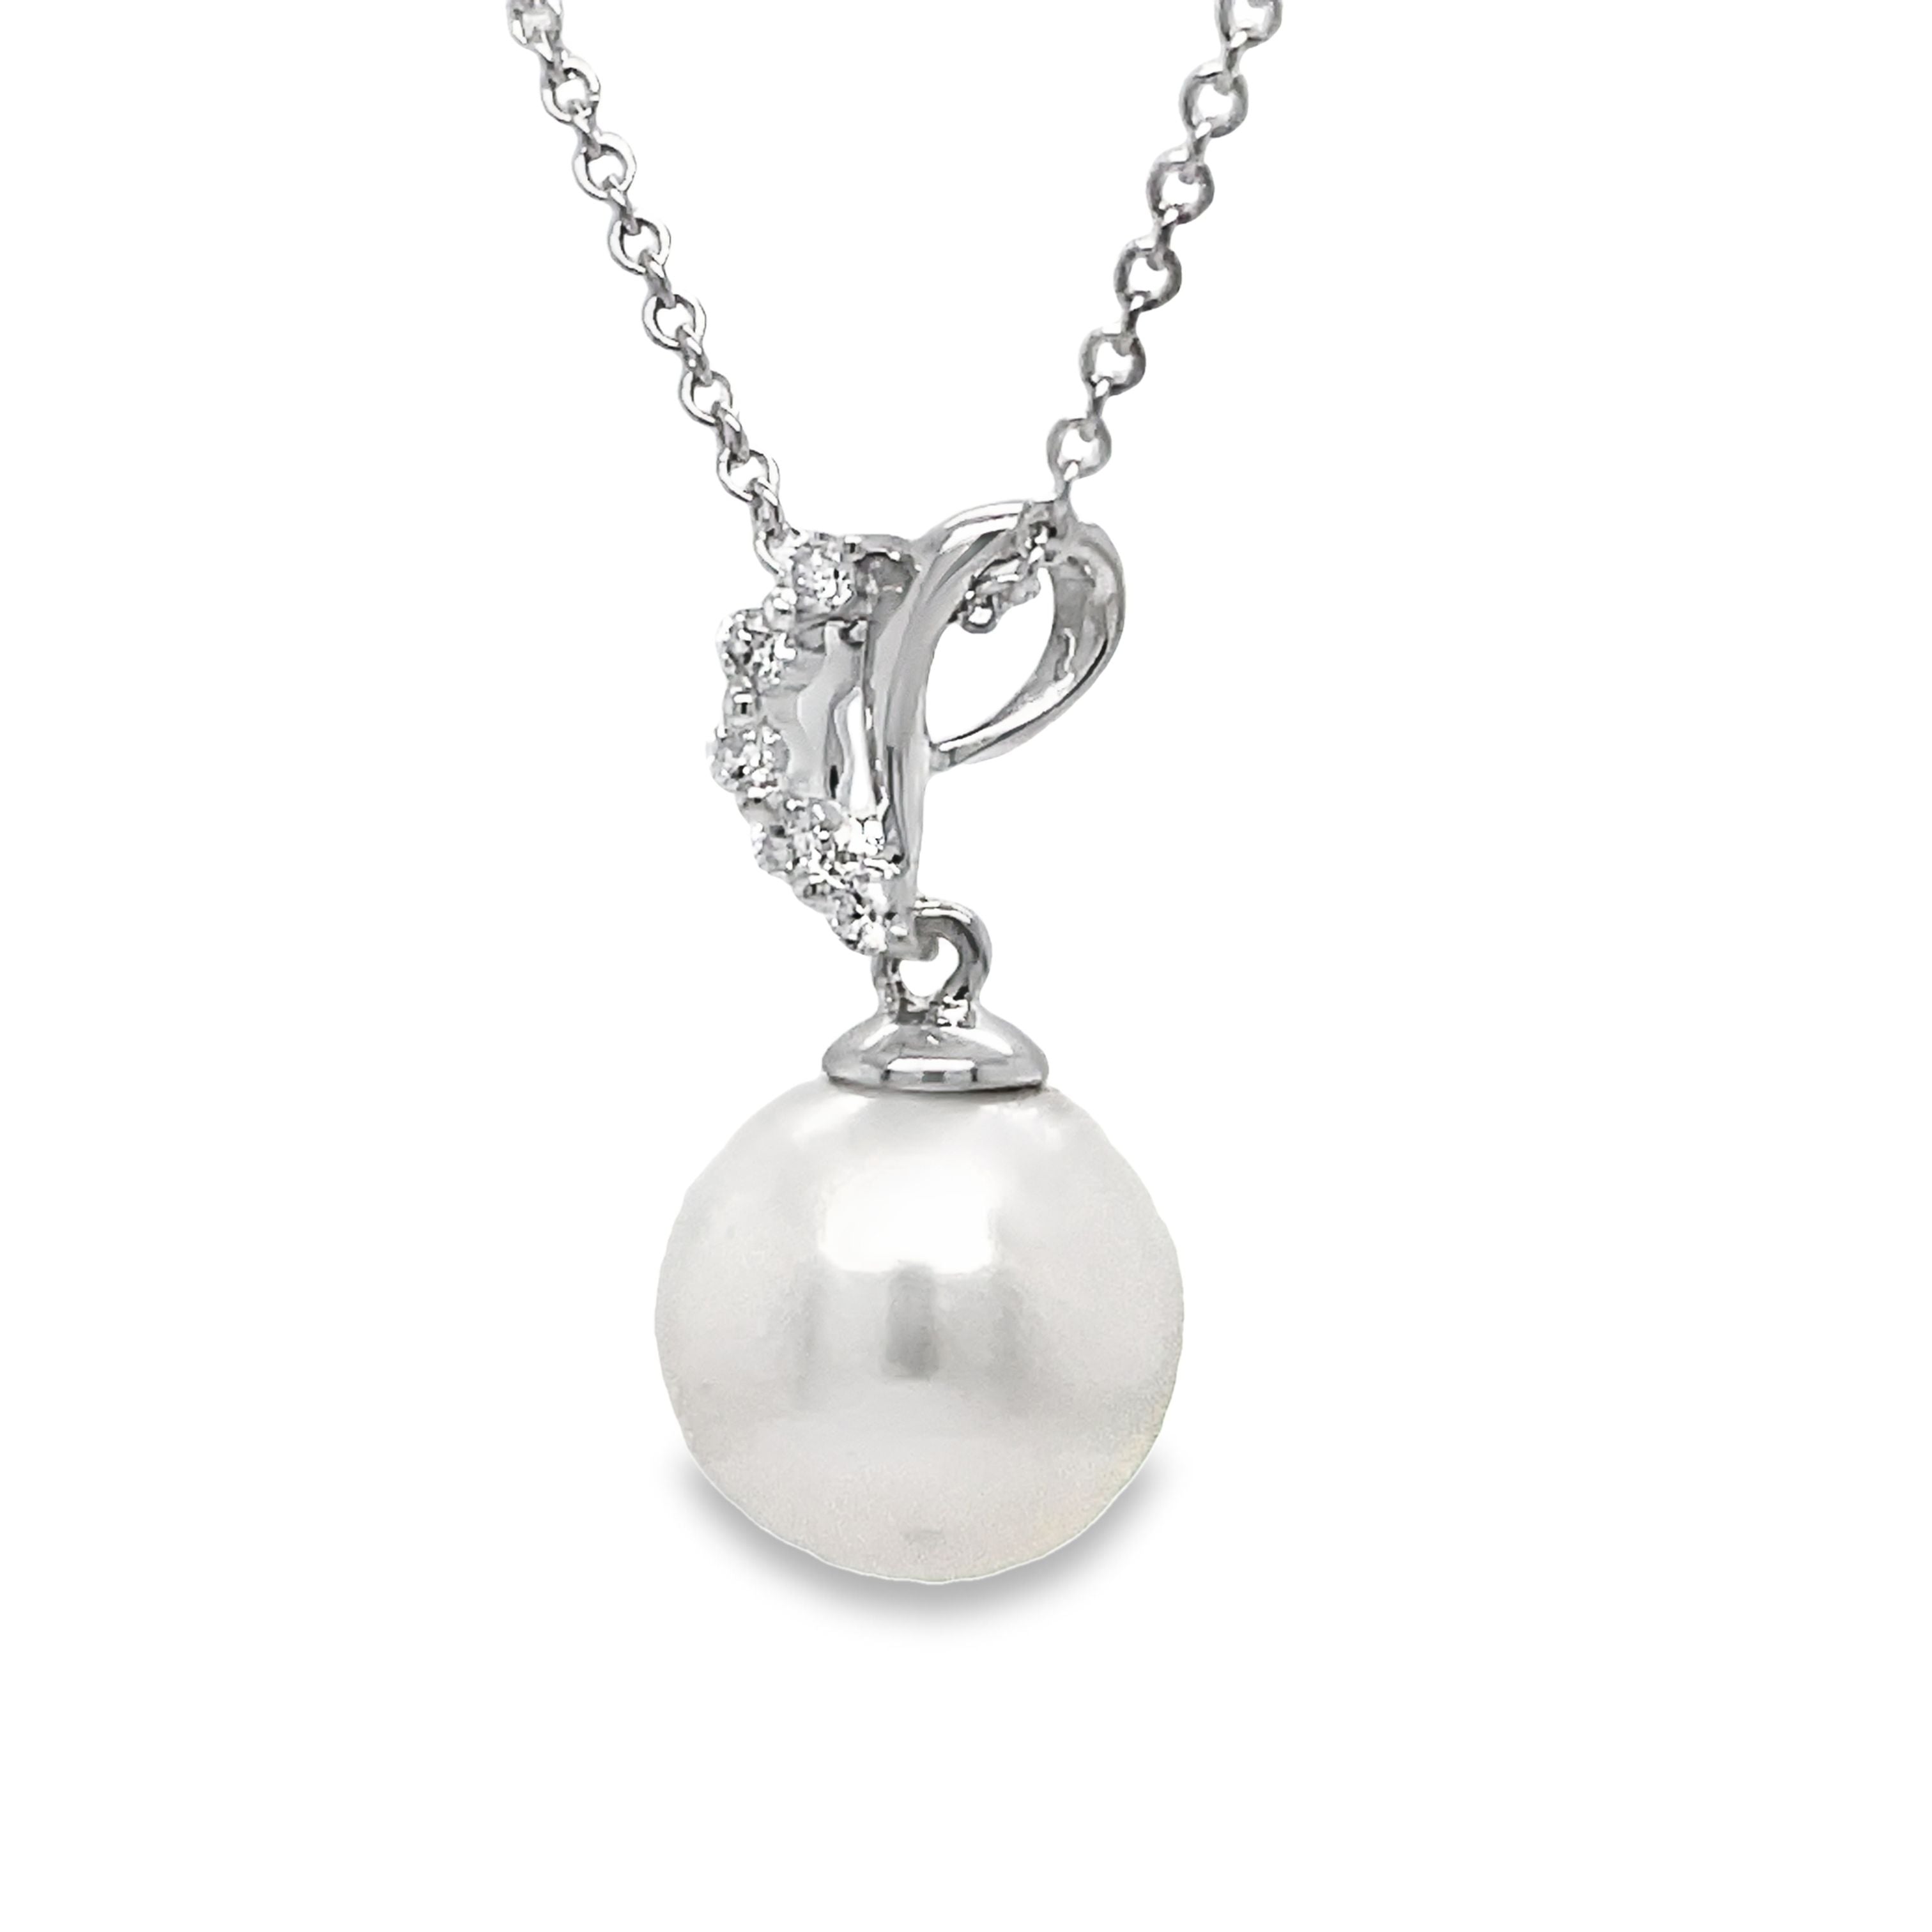 This 14k white gold necklace features a stunning South Sea pearl with great luster and color measuring 10.00 mm. The pearl is accented by a five stone diamond pendant and comes accompanied by an 18" white gold chain. Elevate any look with this elegant and timeless piece.